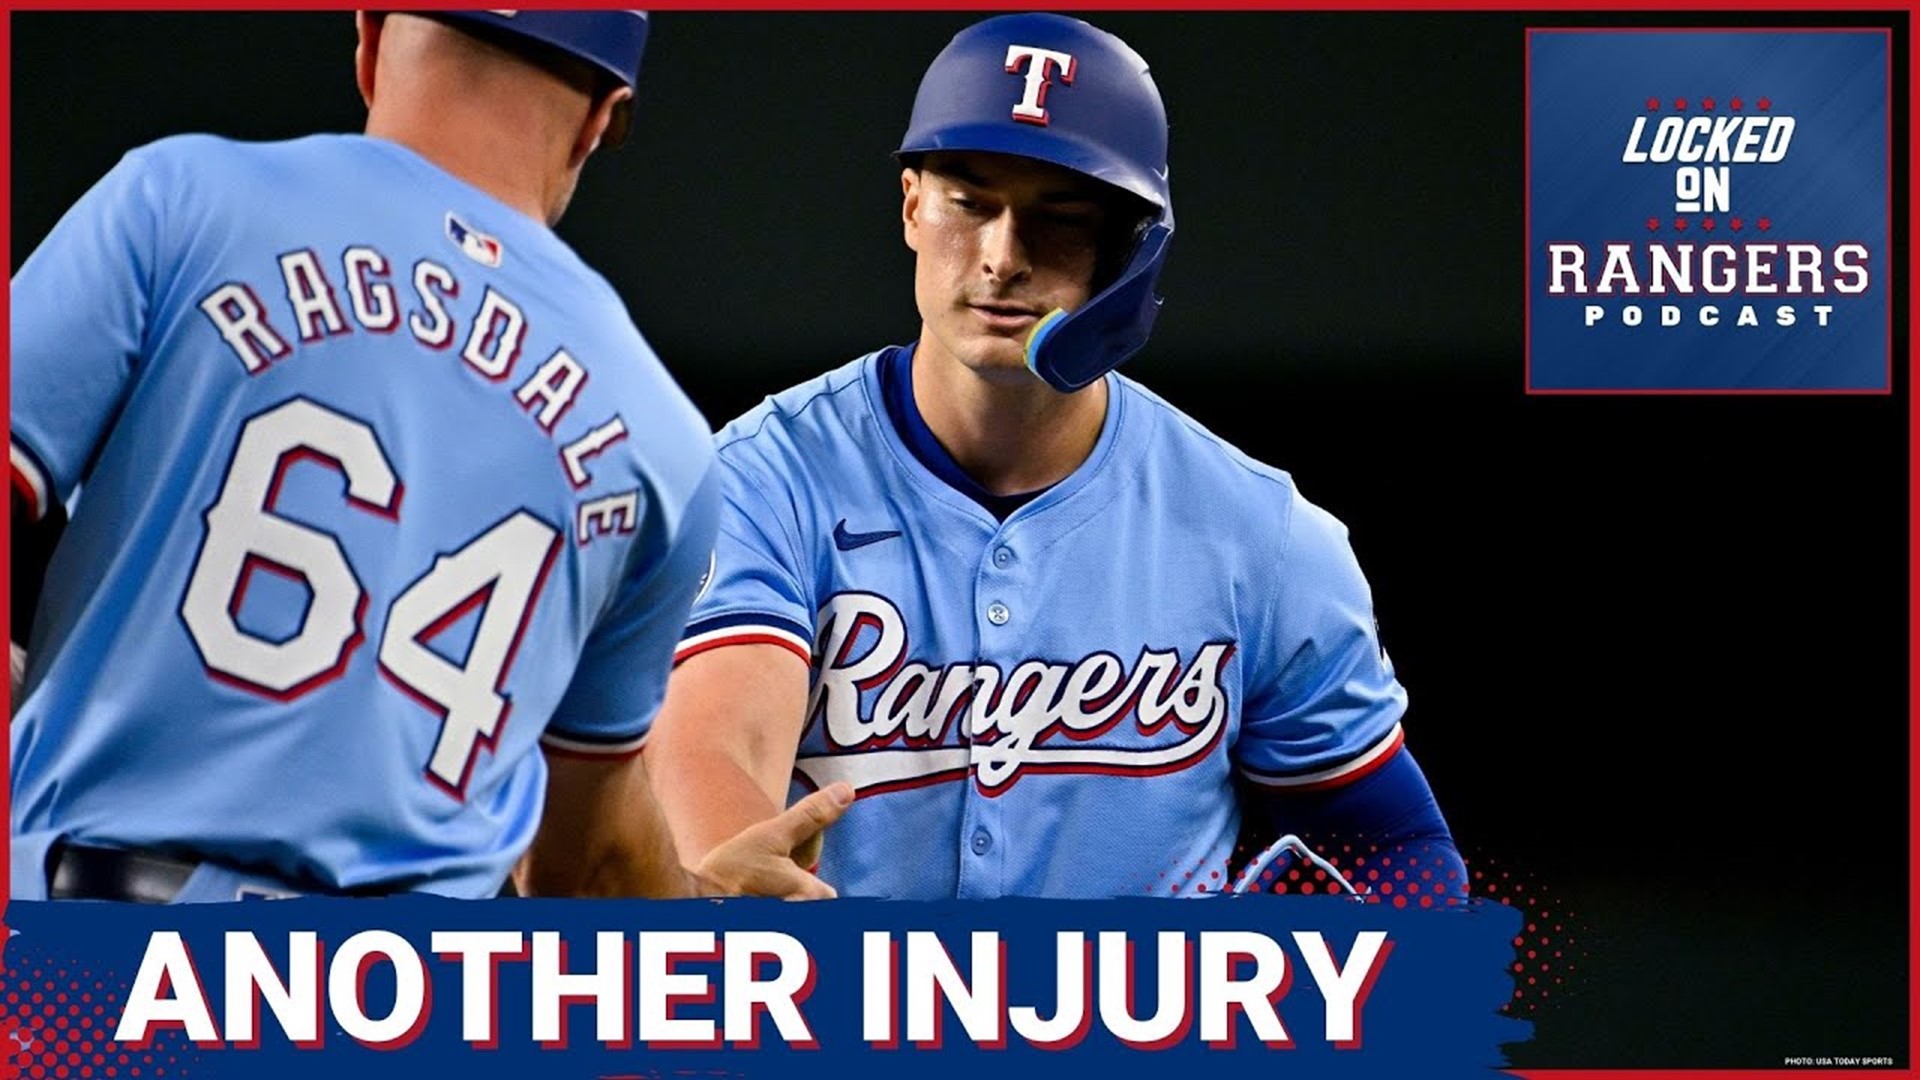 The Texas Rangers suffered another injury when top prospect Justin Foscue strained his oblique during his first MLB hit and landed on the injured list.